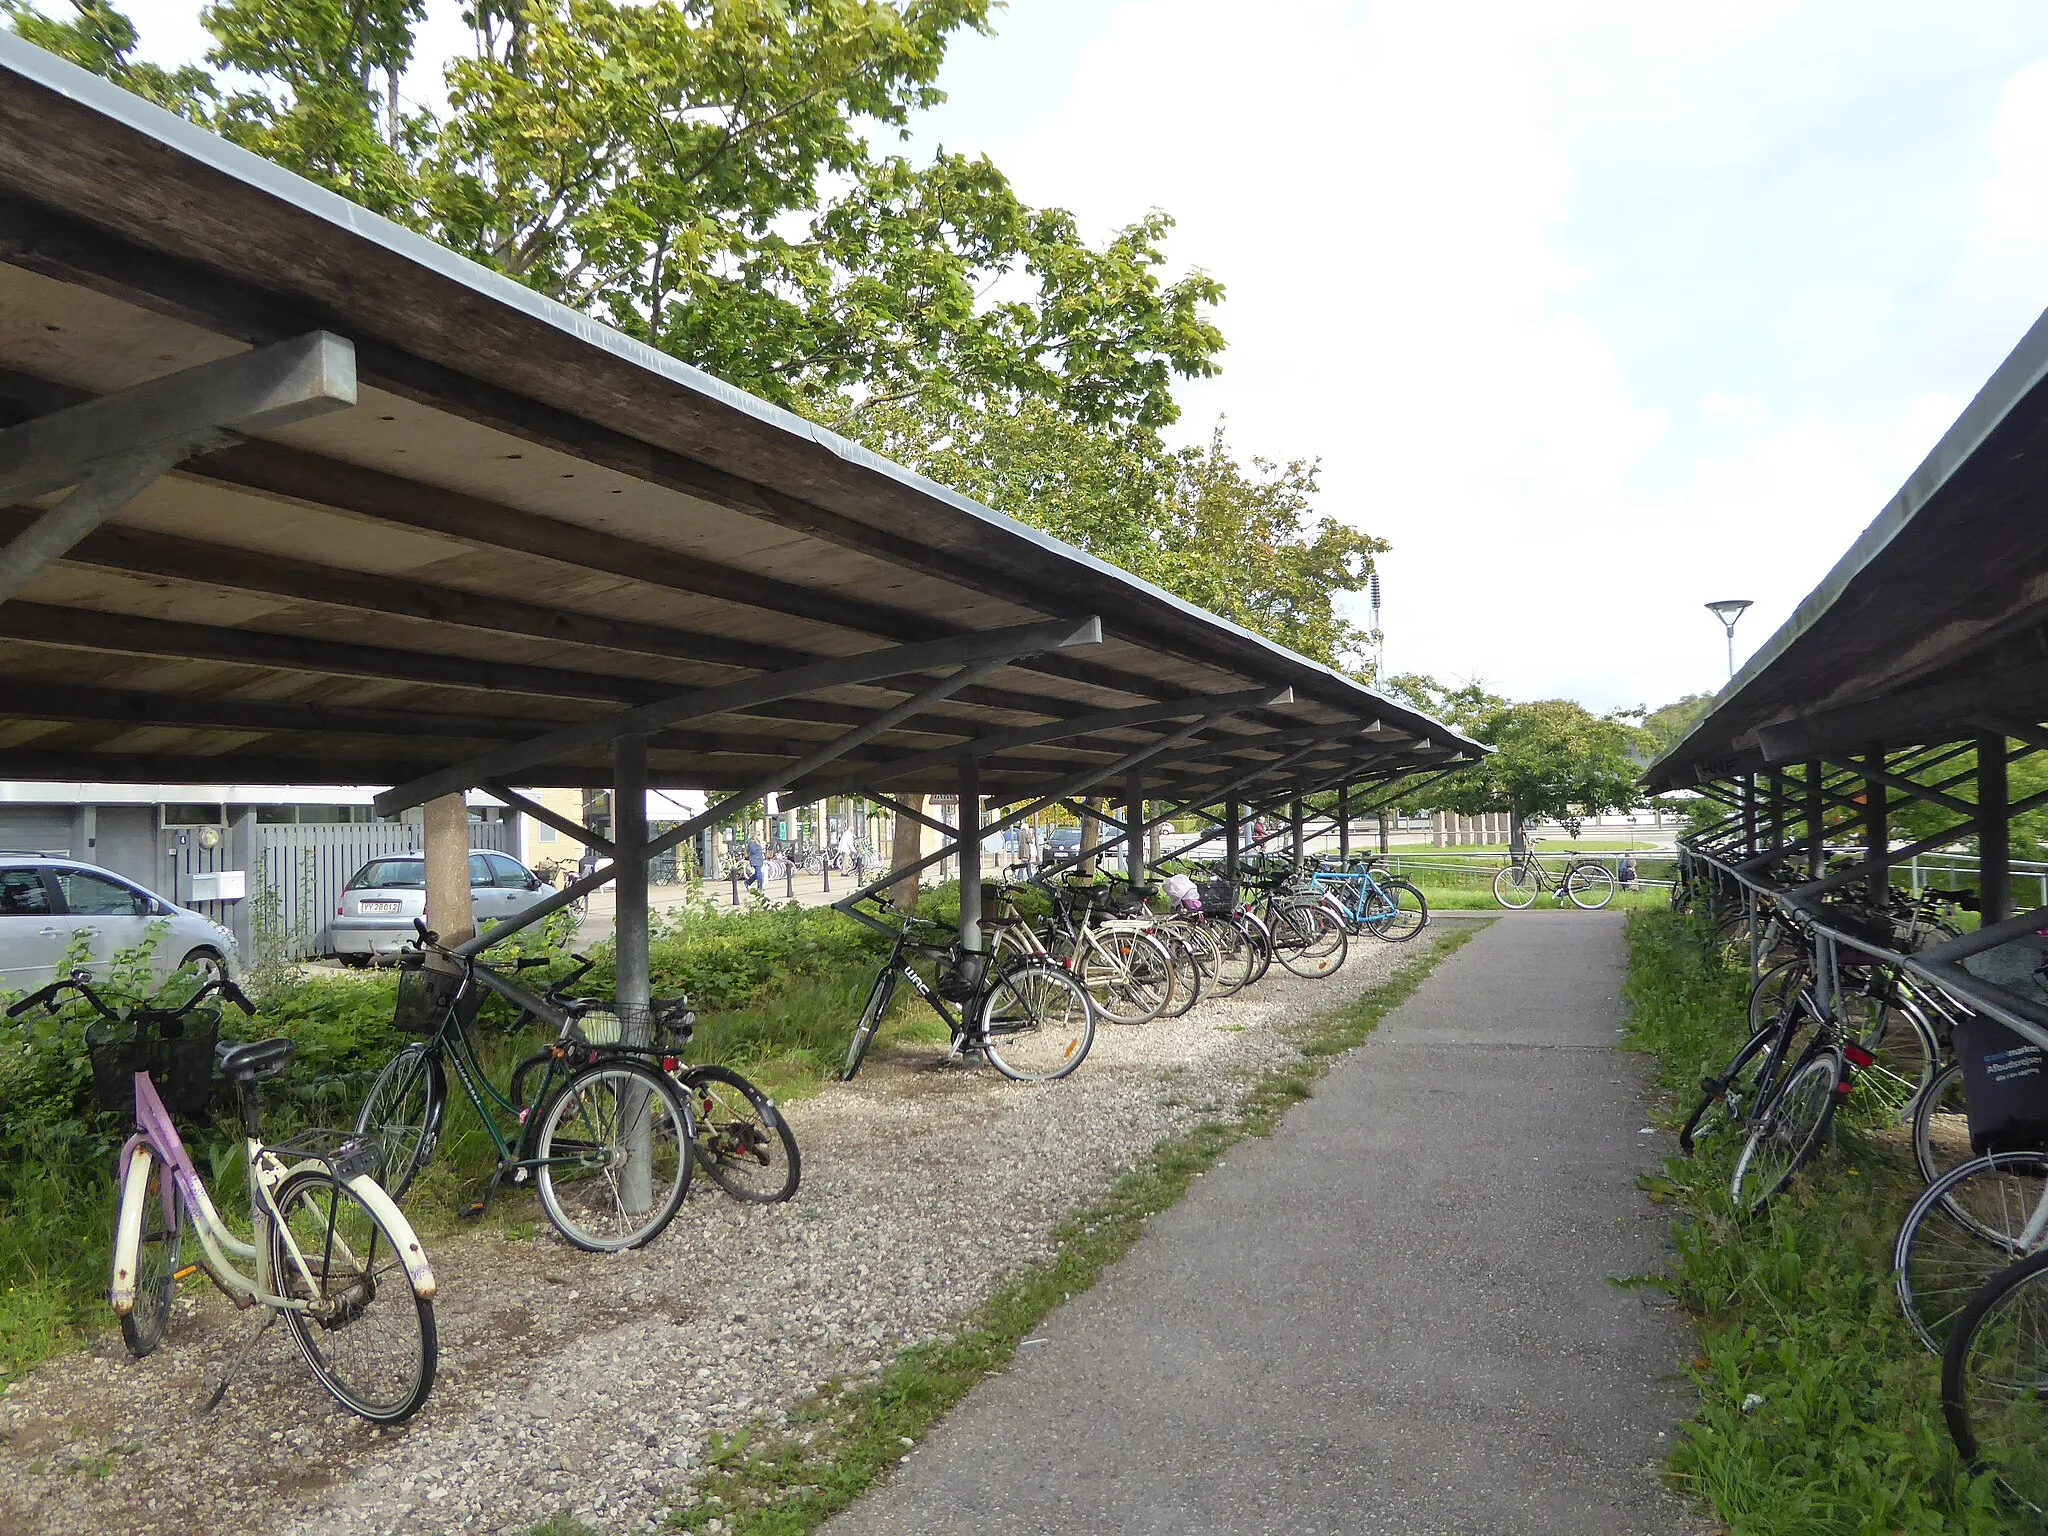 Photo showing: Bicycle racks at Humlebæk Station on Kystbanen in Denmark.